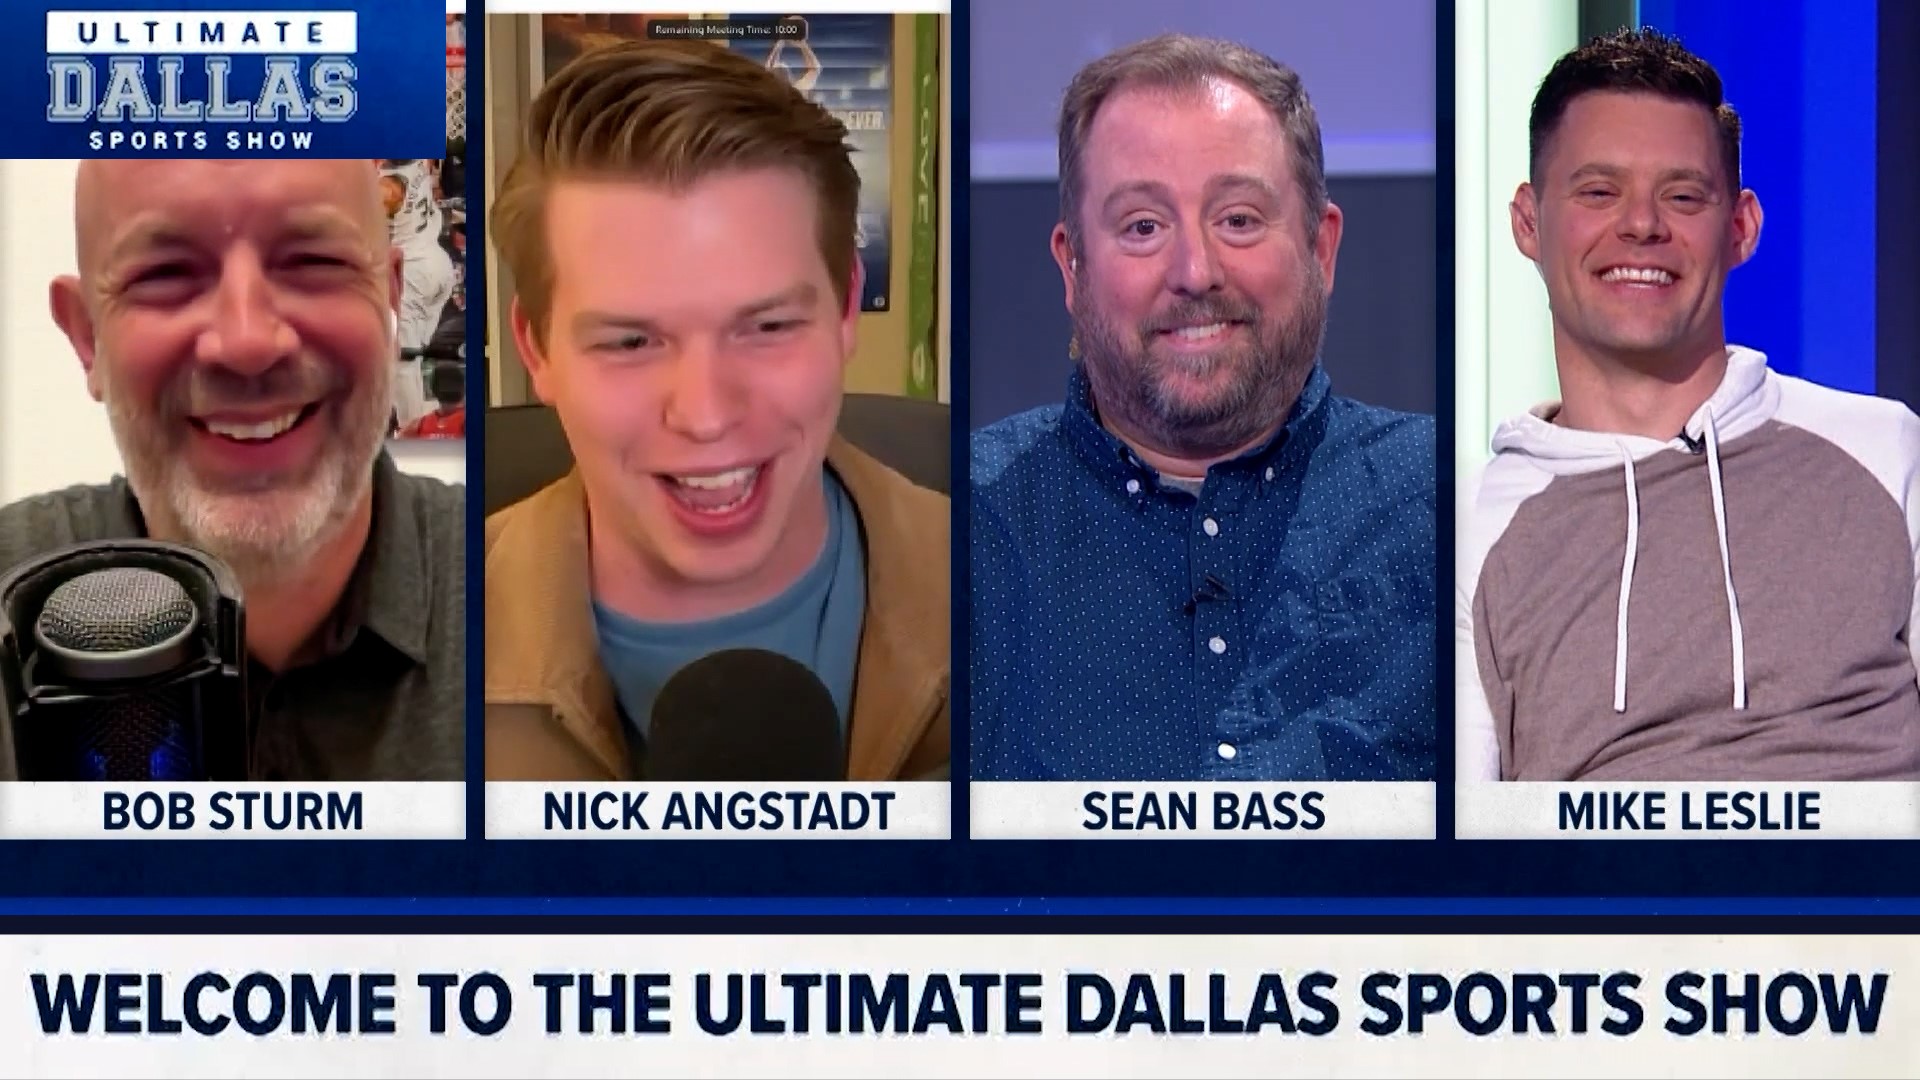 The Ultimate Dallas Sports Show tackles Luka Doncic's case for NBA MVP, the Rangers' recent struggles and the Top 5 most magnetic athletes of the 21st century.